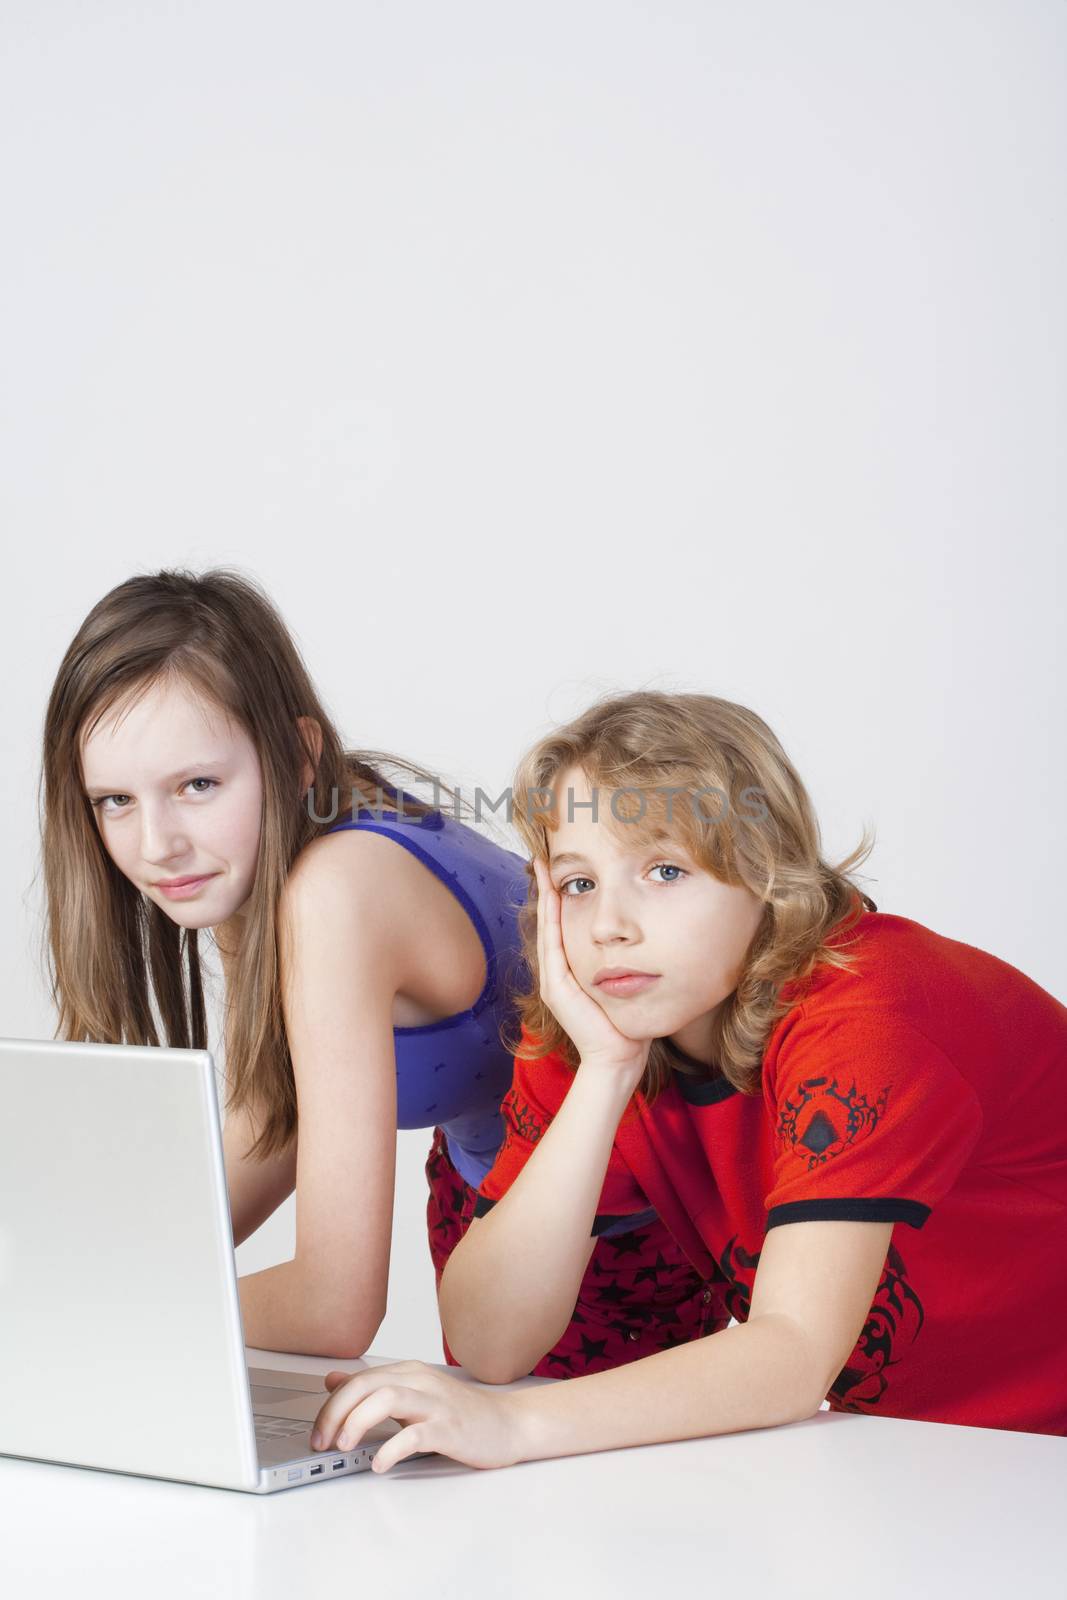 young boy and girl having fun with laptop computer